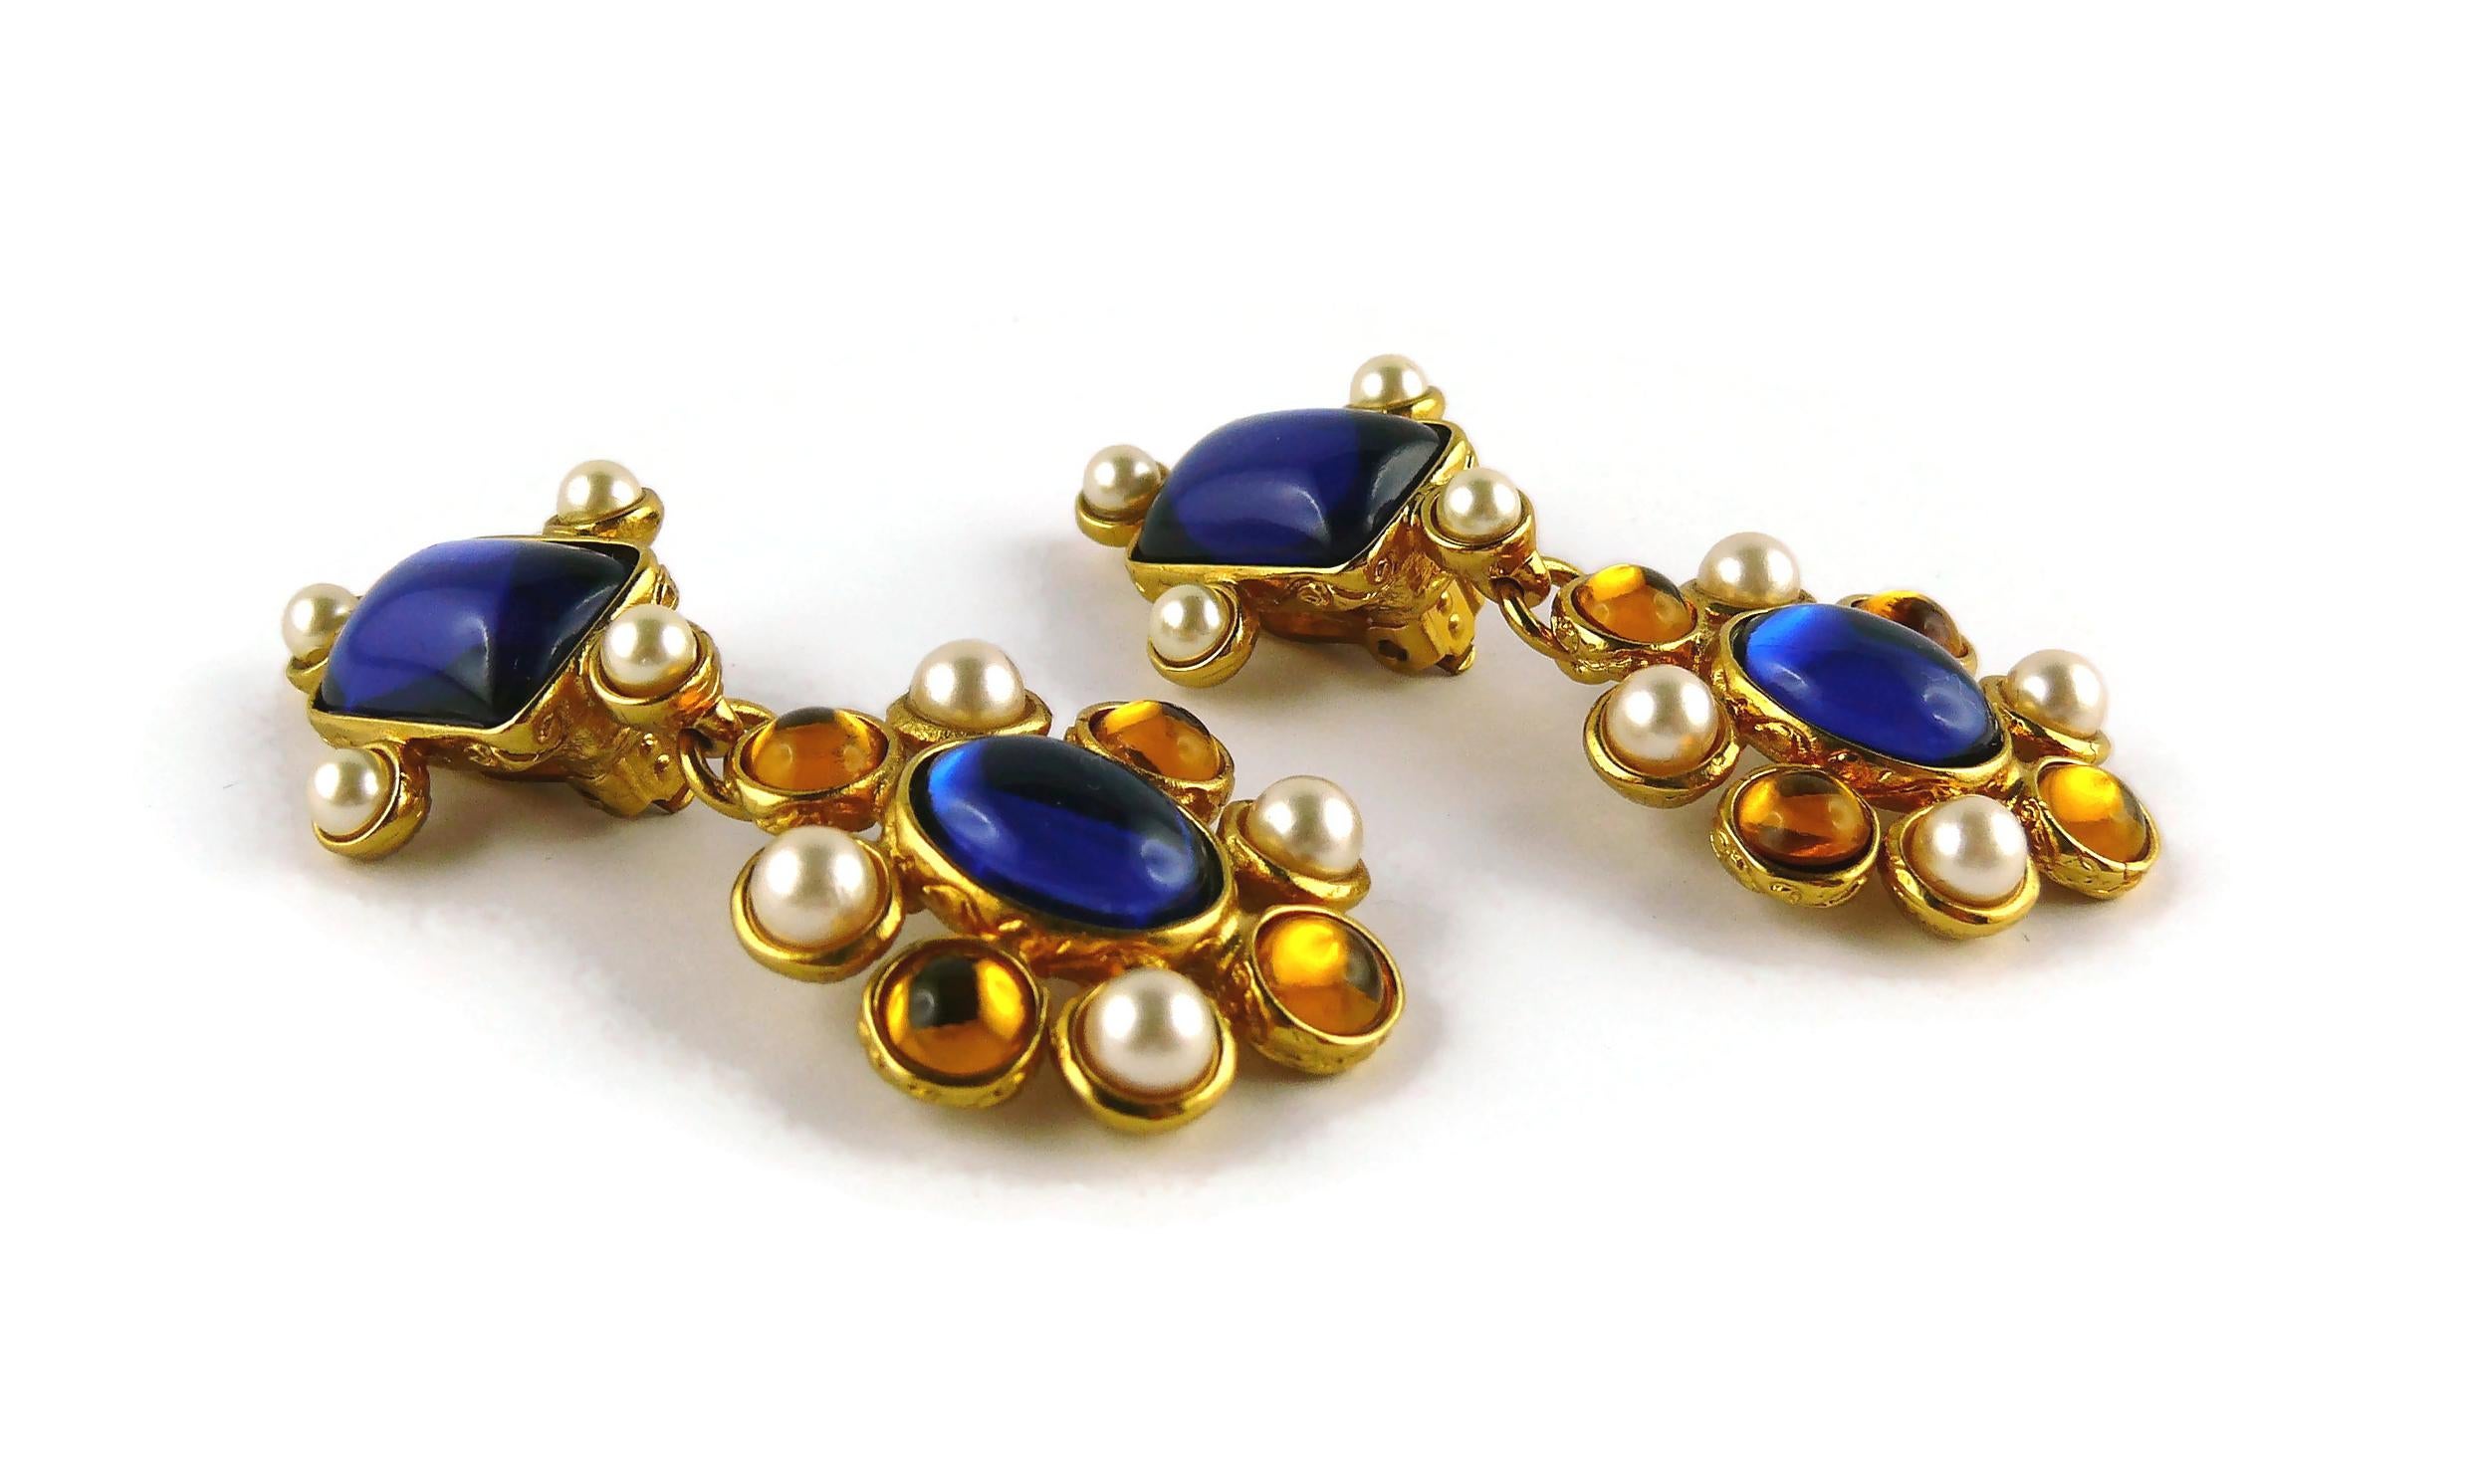 Yves Saint Laurent YSL Vintage Blue Orange Faux Pearls Dangling Earrings In Excellent Condition For Sale In Nice, FR